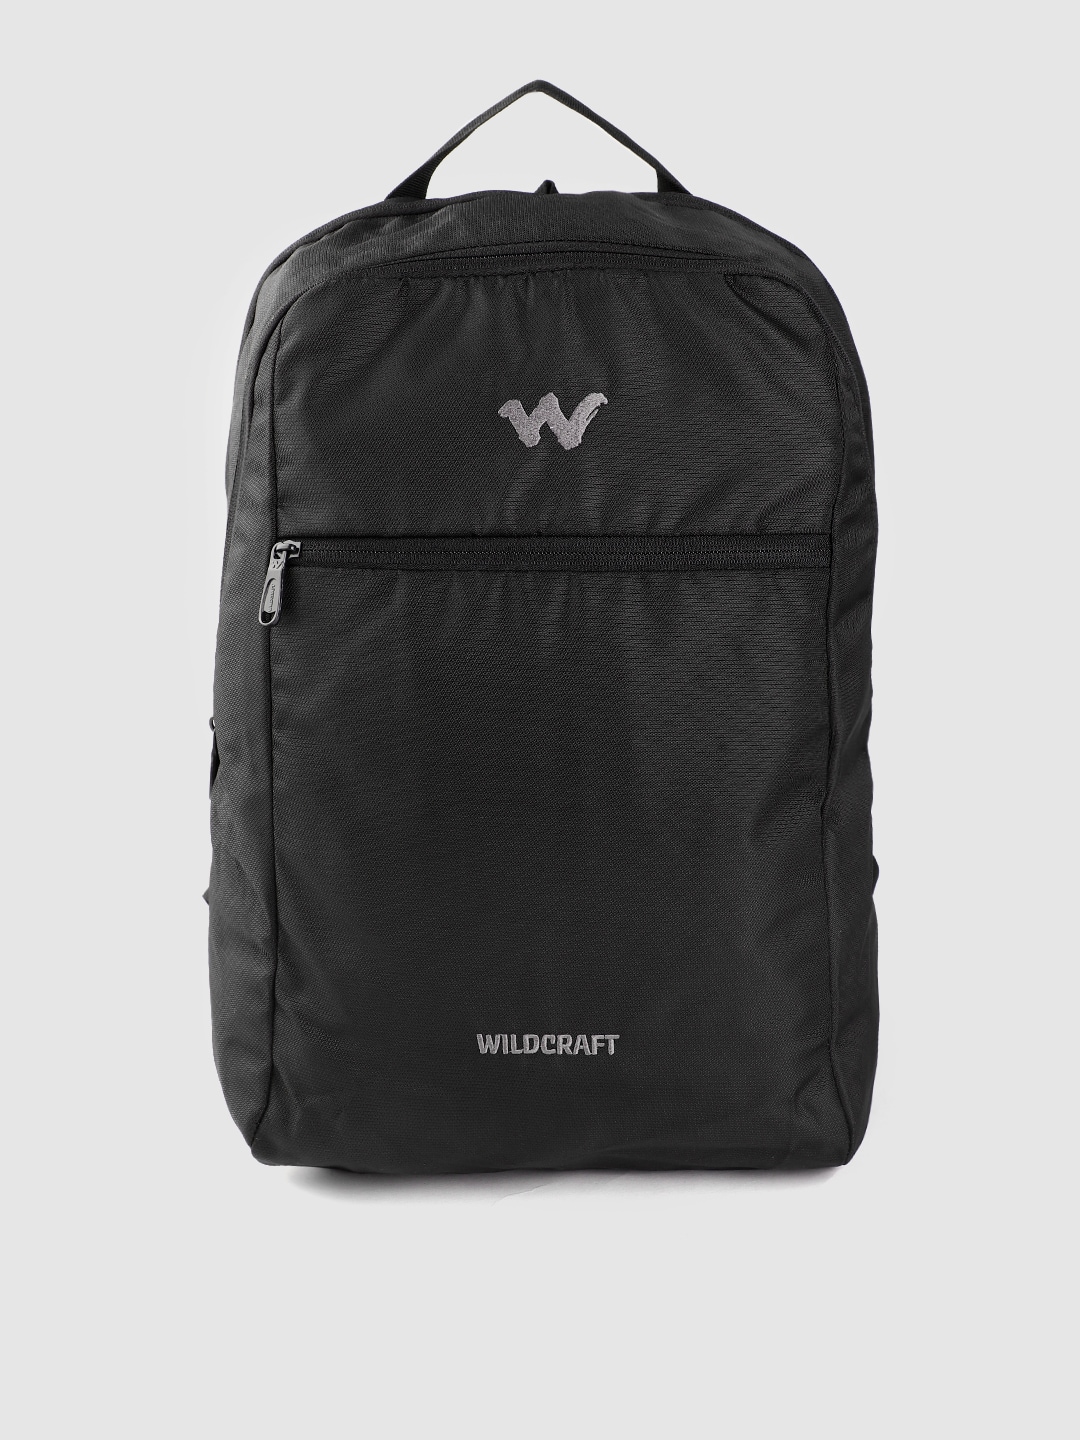 Wildcraft Unisex Black Solid 14 Inch Laptop Backpack Price in India